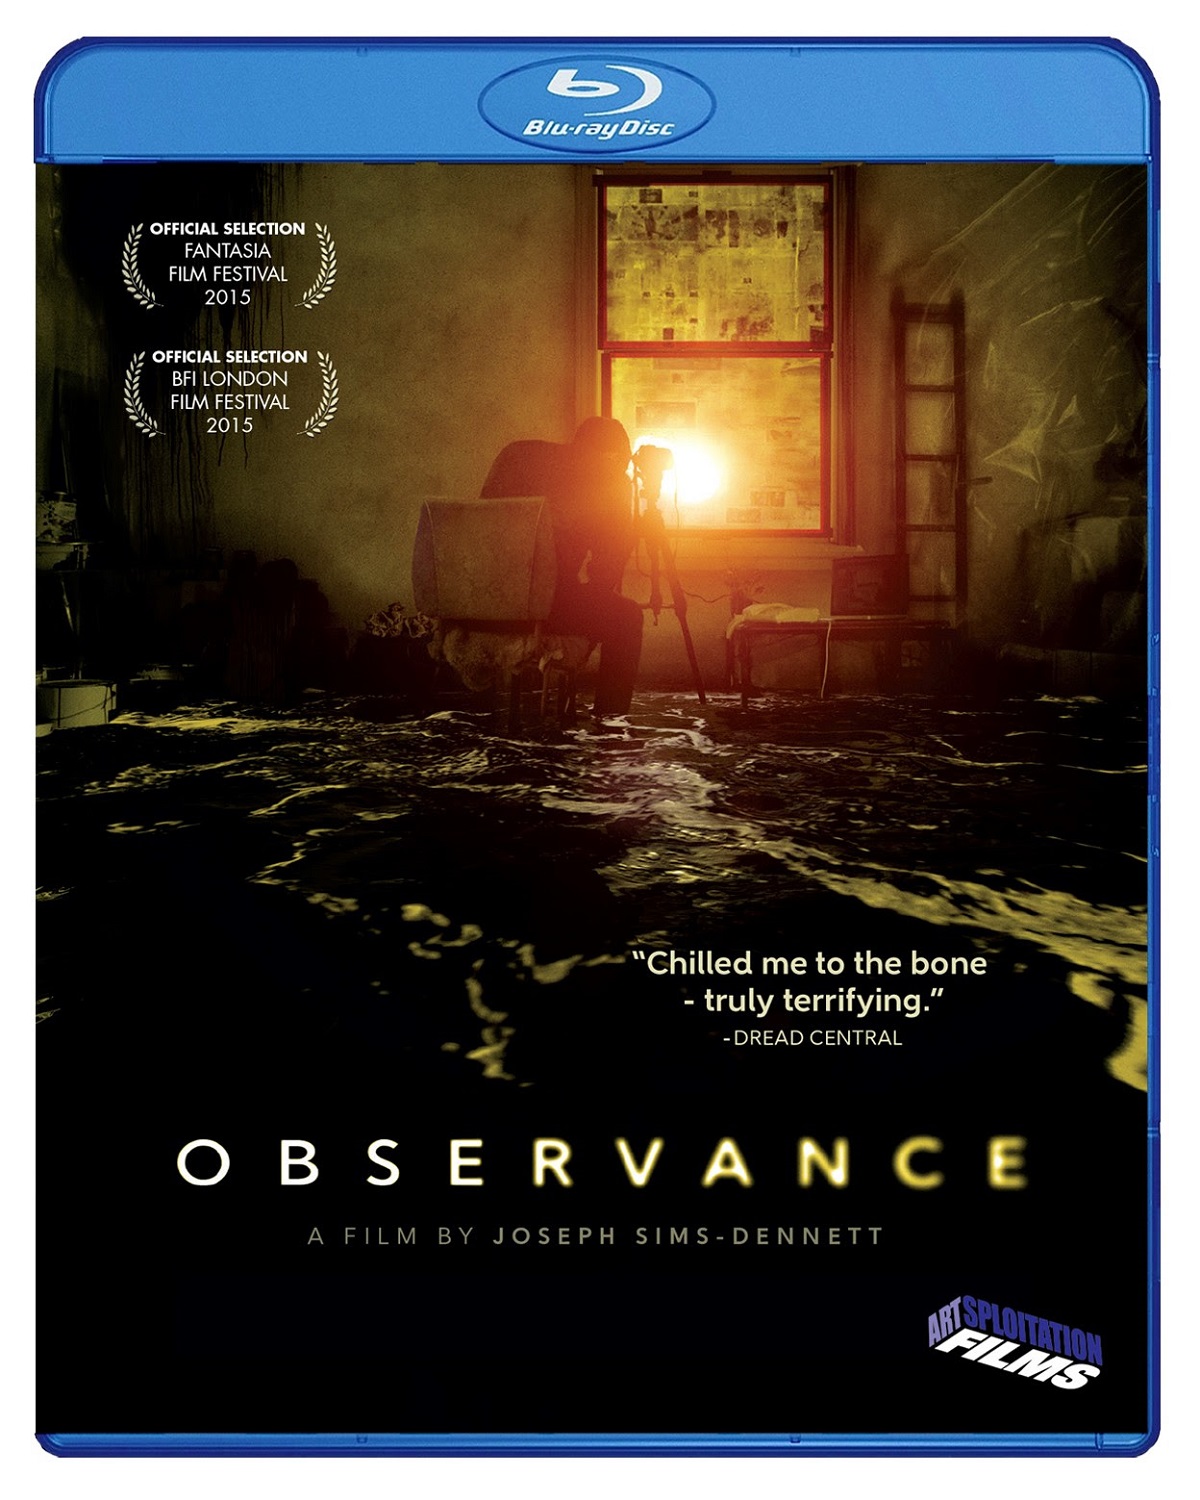 Thriller ‘Observance’ Coming to DVD & Blu-ray